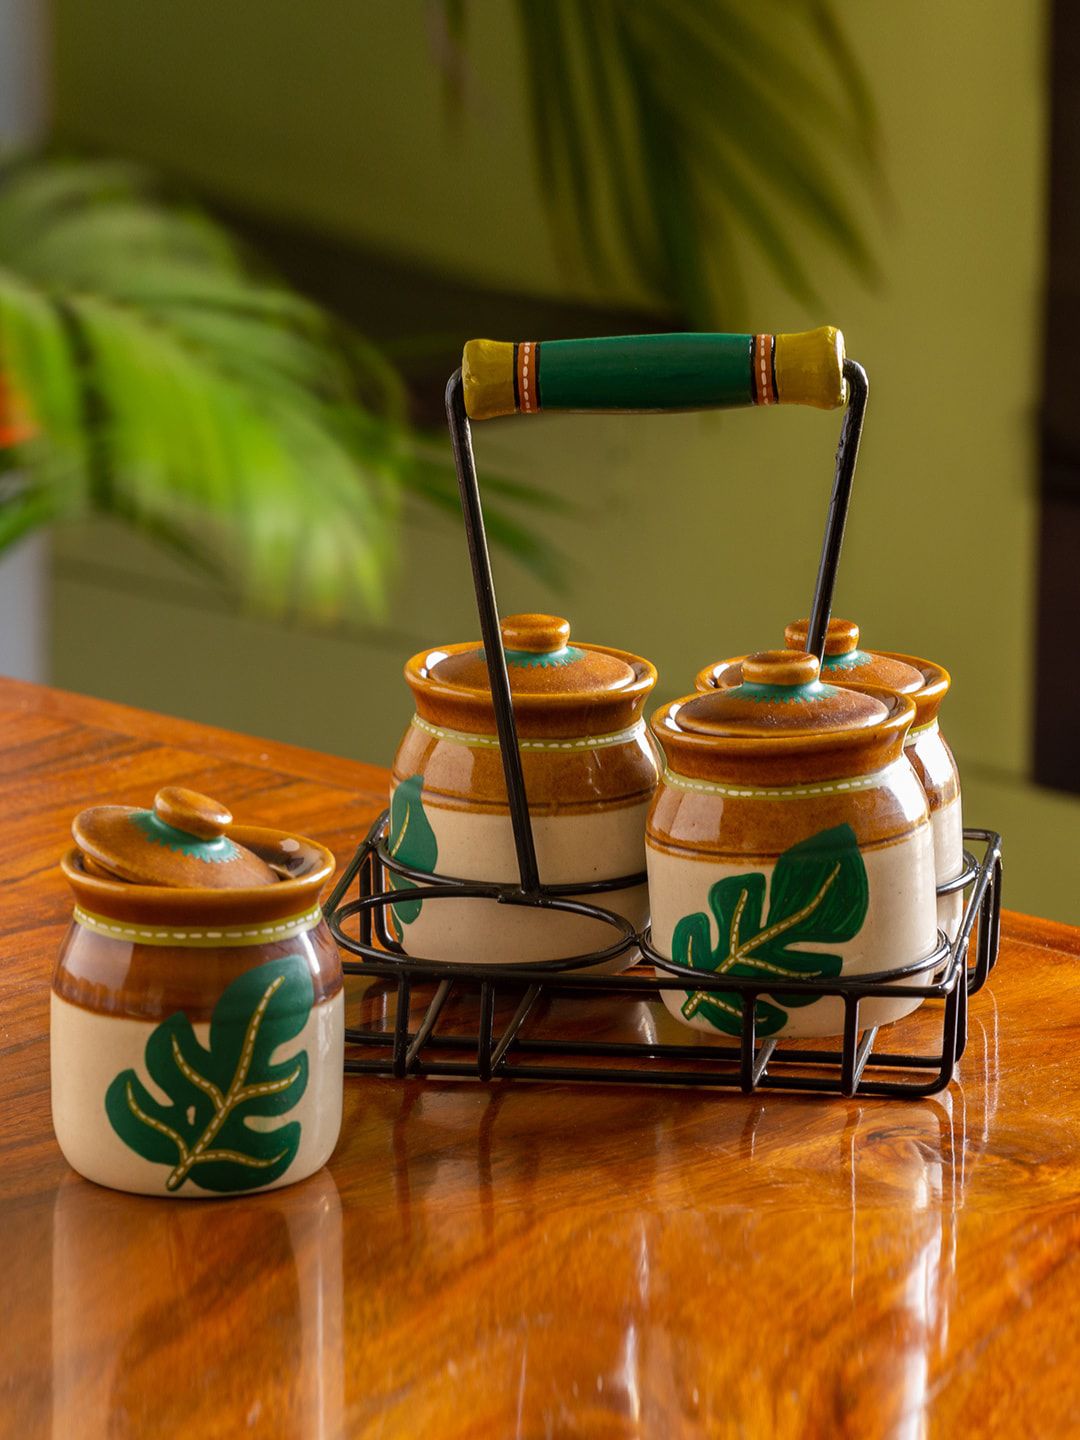 ExclusiveLane Set Of 4 Brown & Green Ceramic Jars With Lid & Iron Holder Price in India